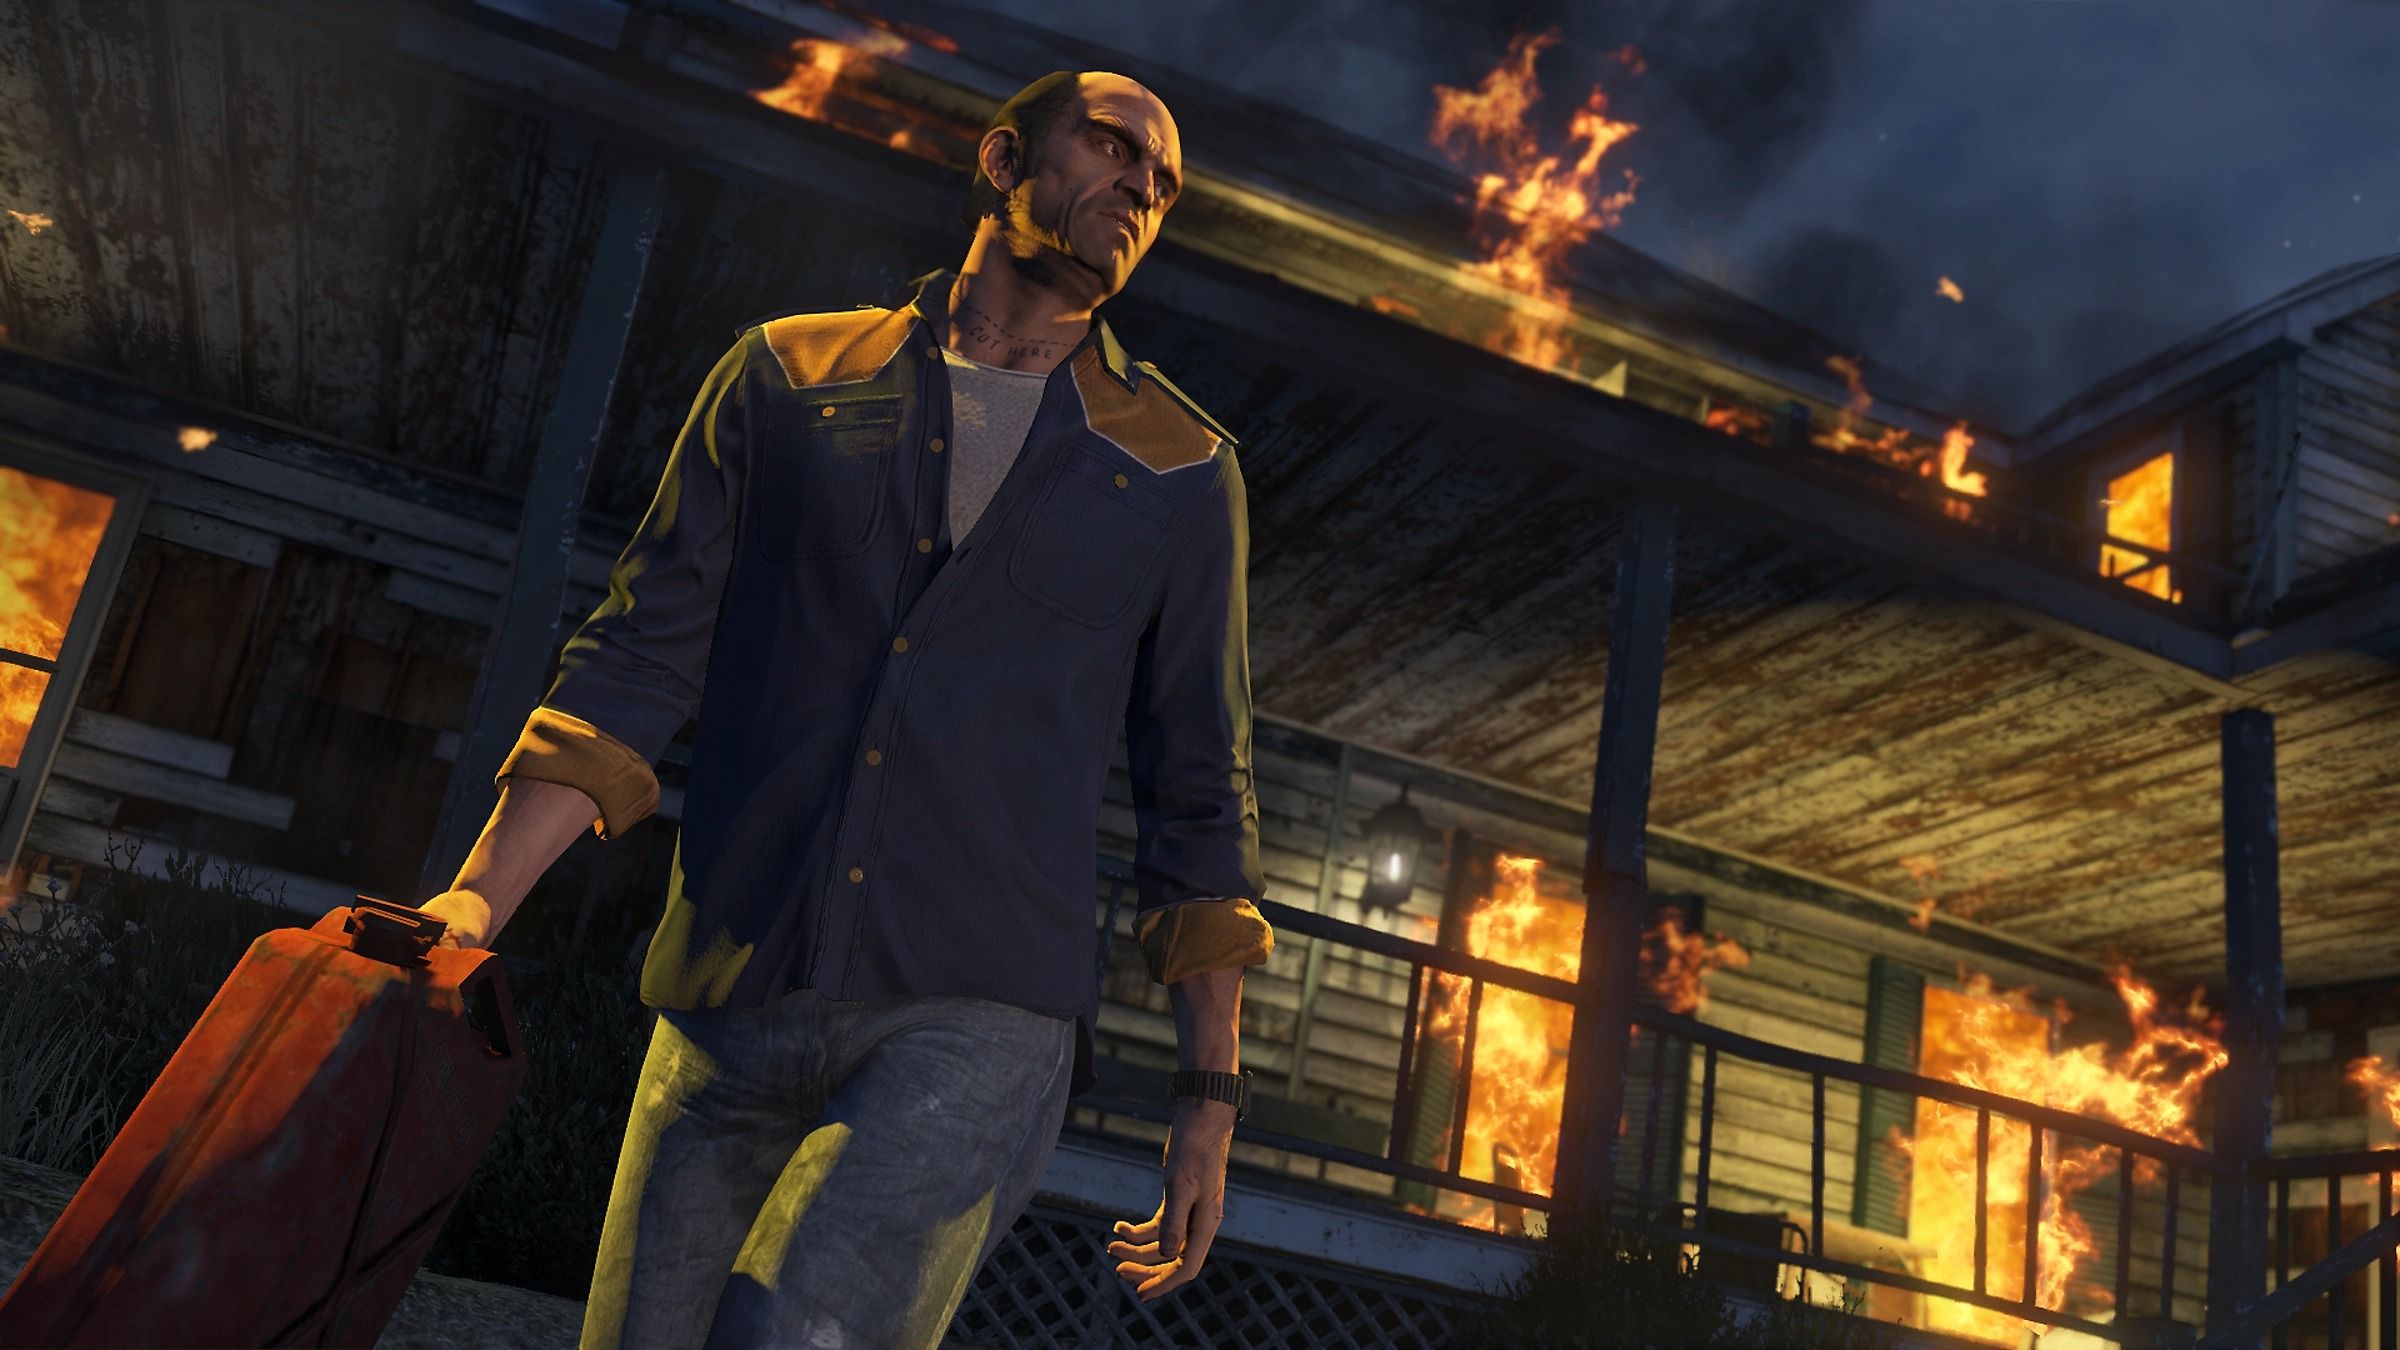 Top GTA PC Games in 2023: System Requirements, Metacritic Rating